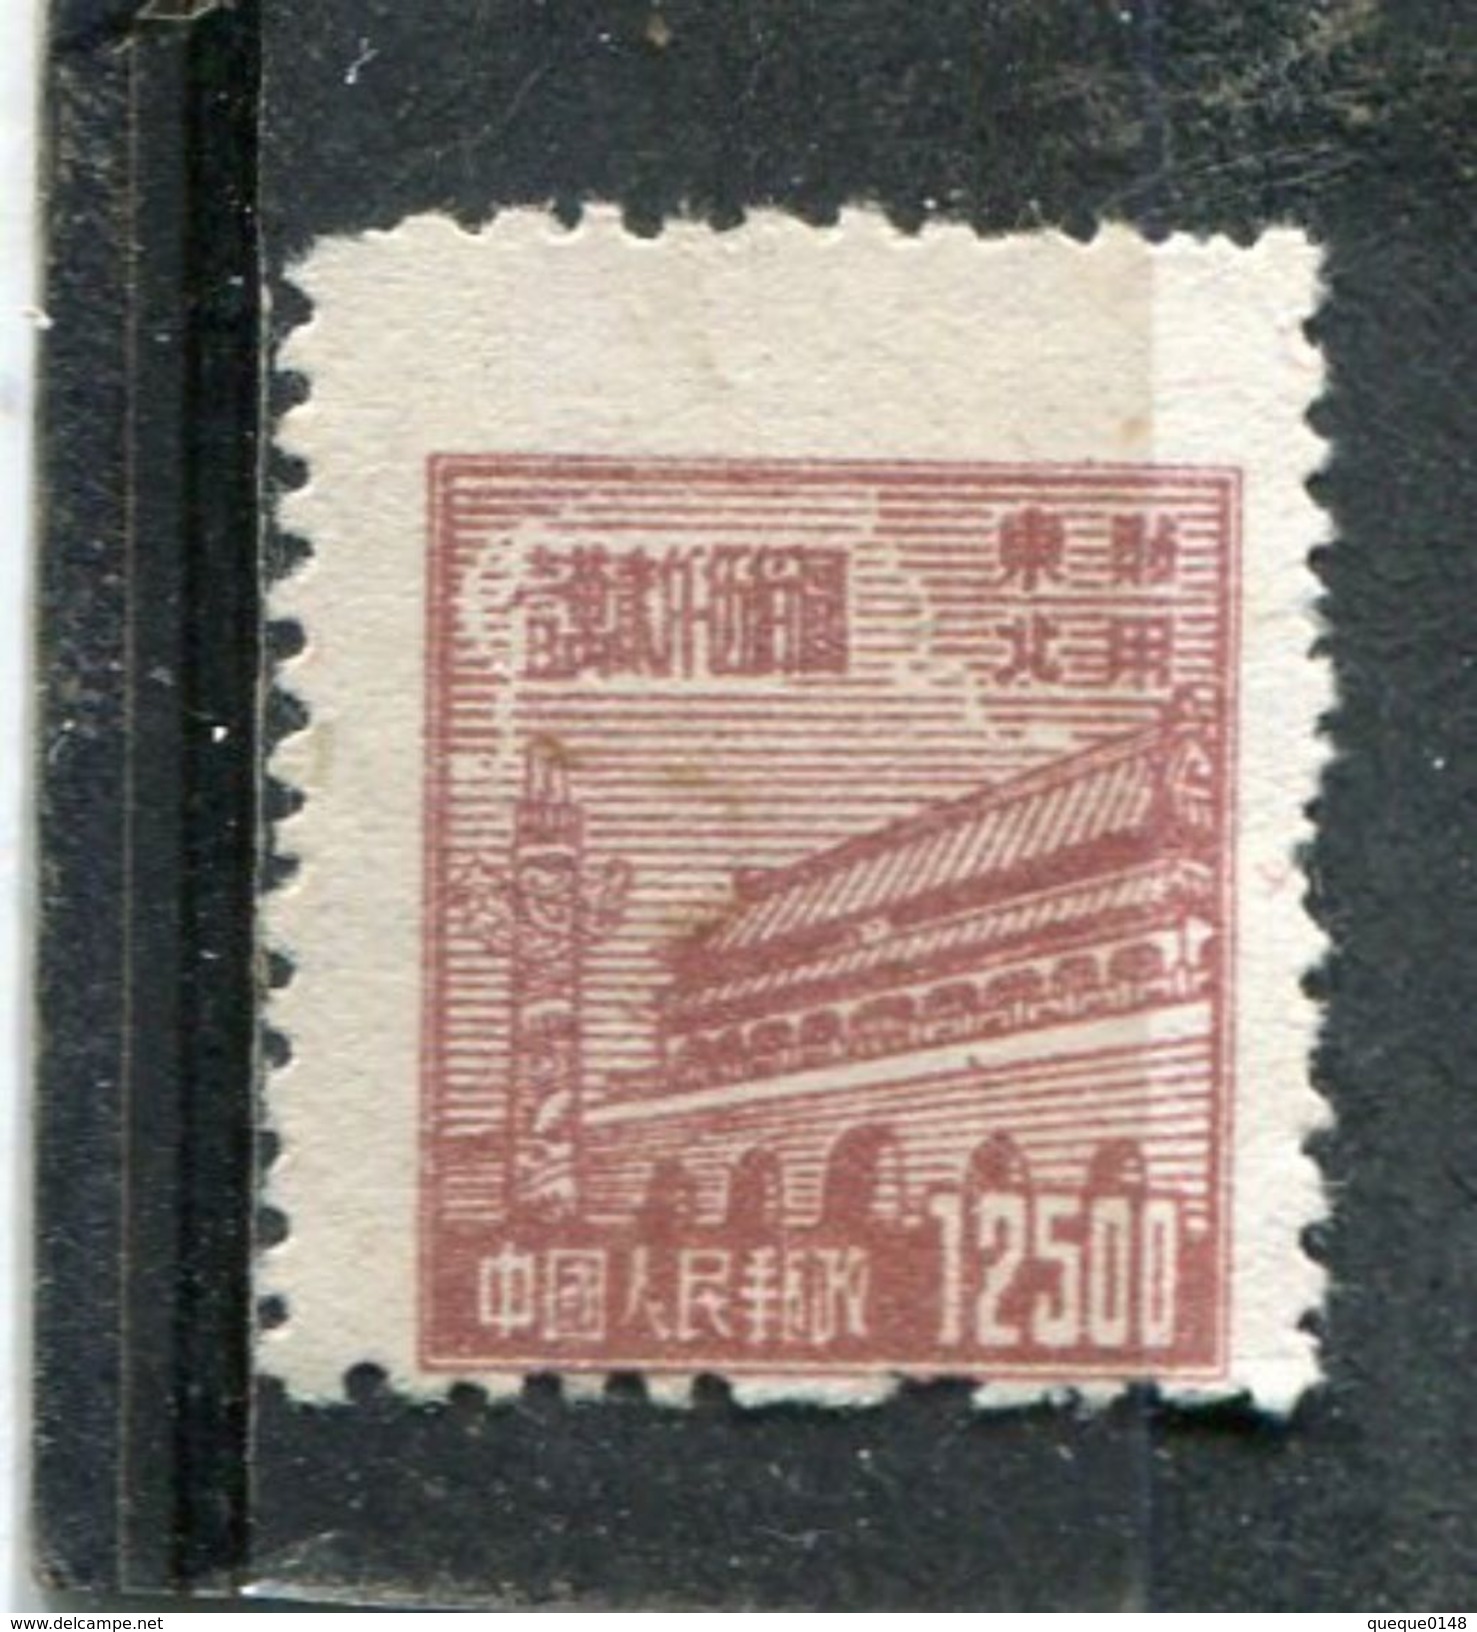 CHINA, PEOPLE'S REPUBLIC OF. 1950. SCOTT 1L174. GATE OF HEAVENLY PEACE - Unused Stamps